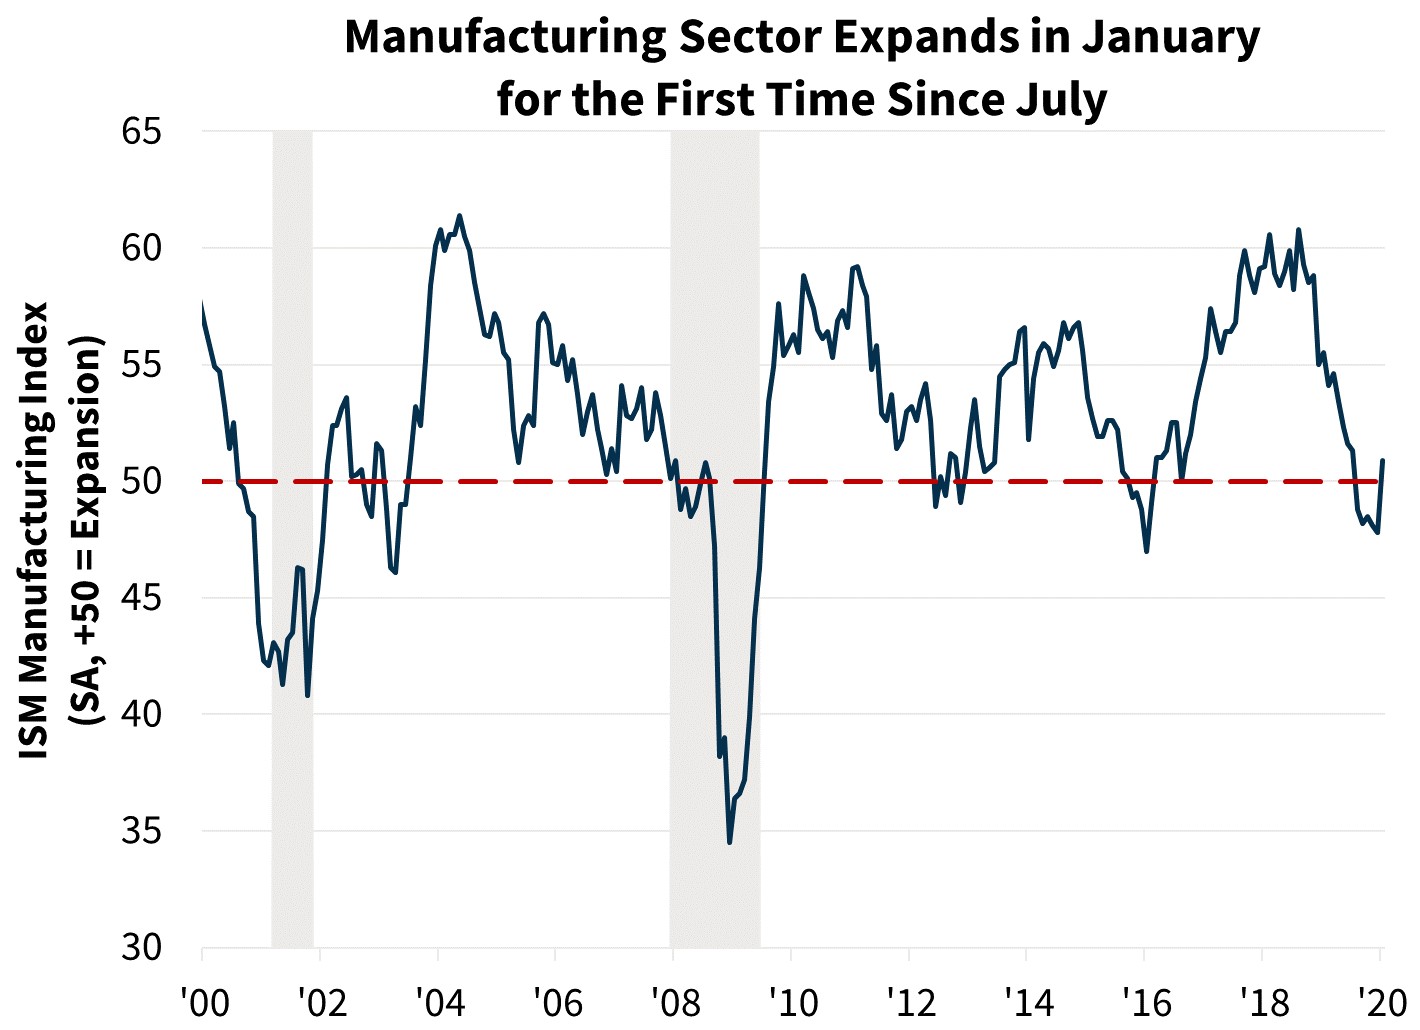 Manufacturing Sector Expands in January for the First Time Since July